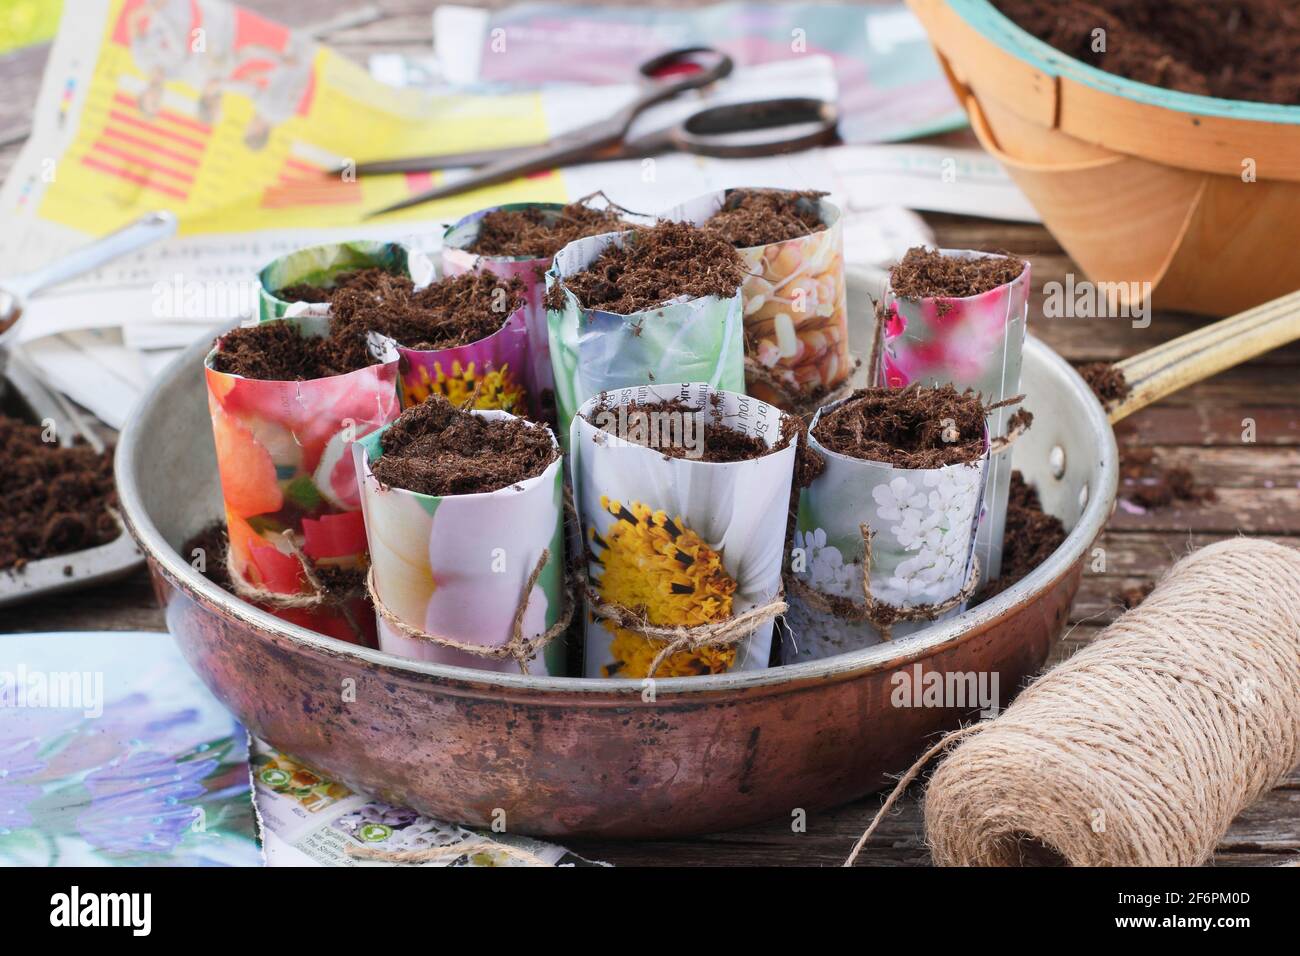 Paper plant pots. Items needed for making paper plant pots to start off seeds - old newspapers and catalogues, scissors, string. Stock Photo